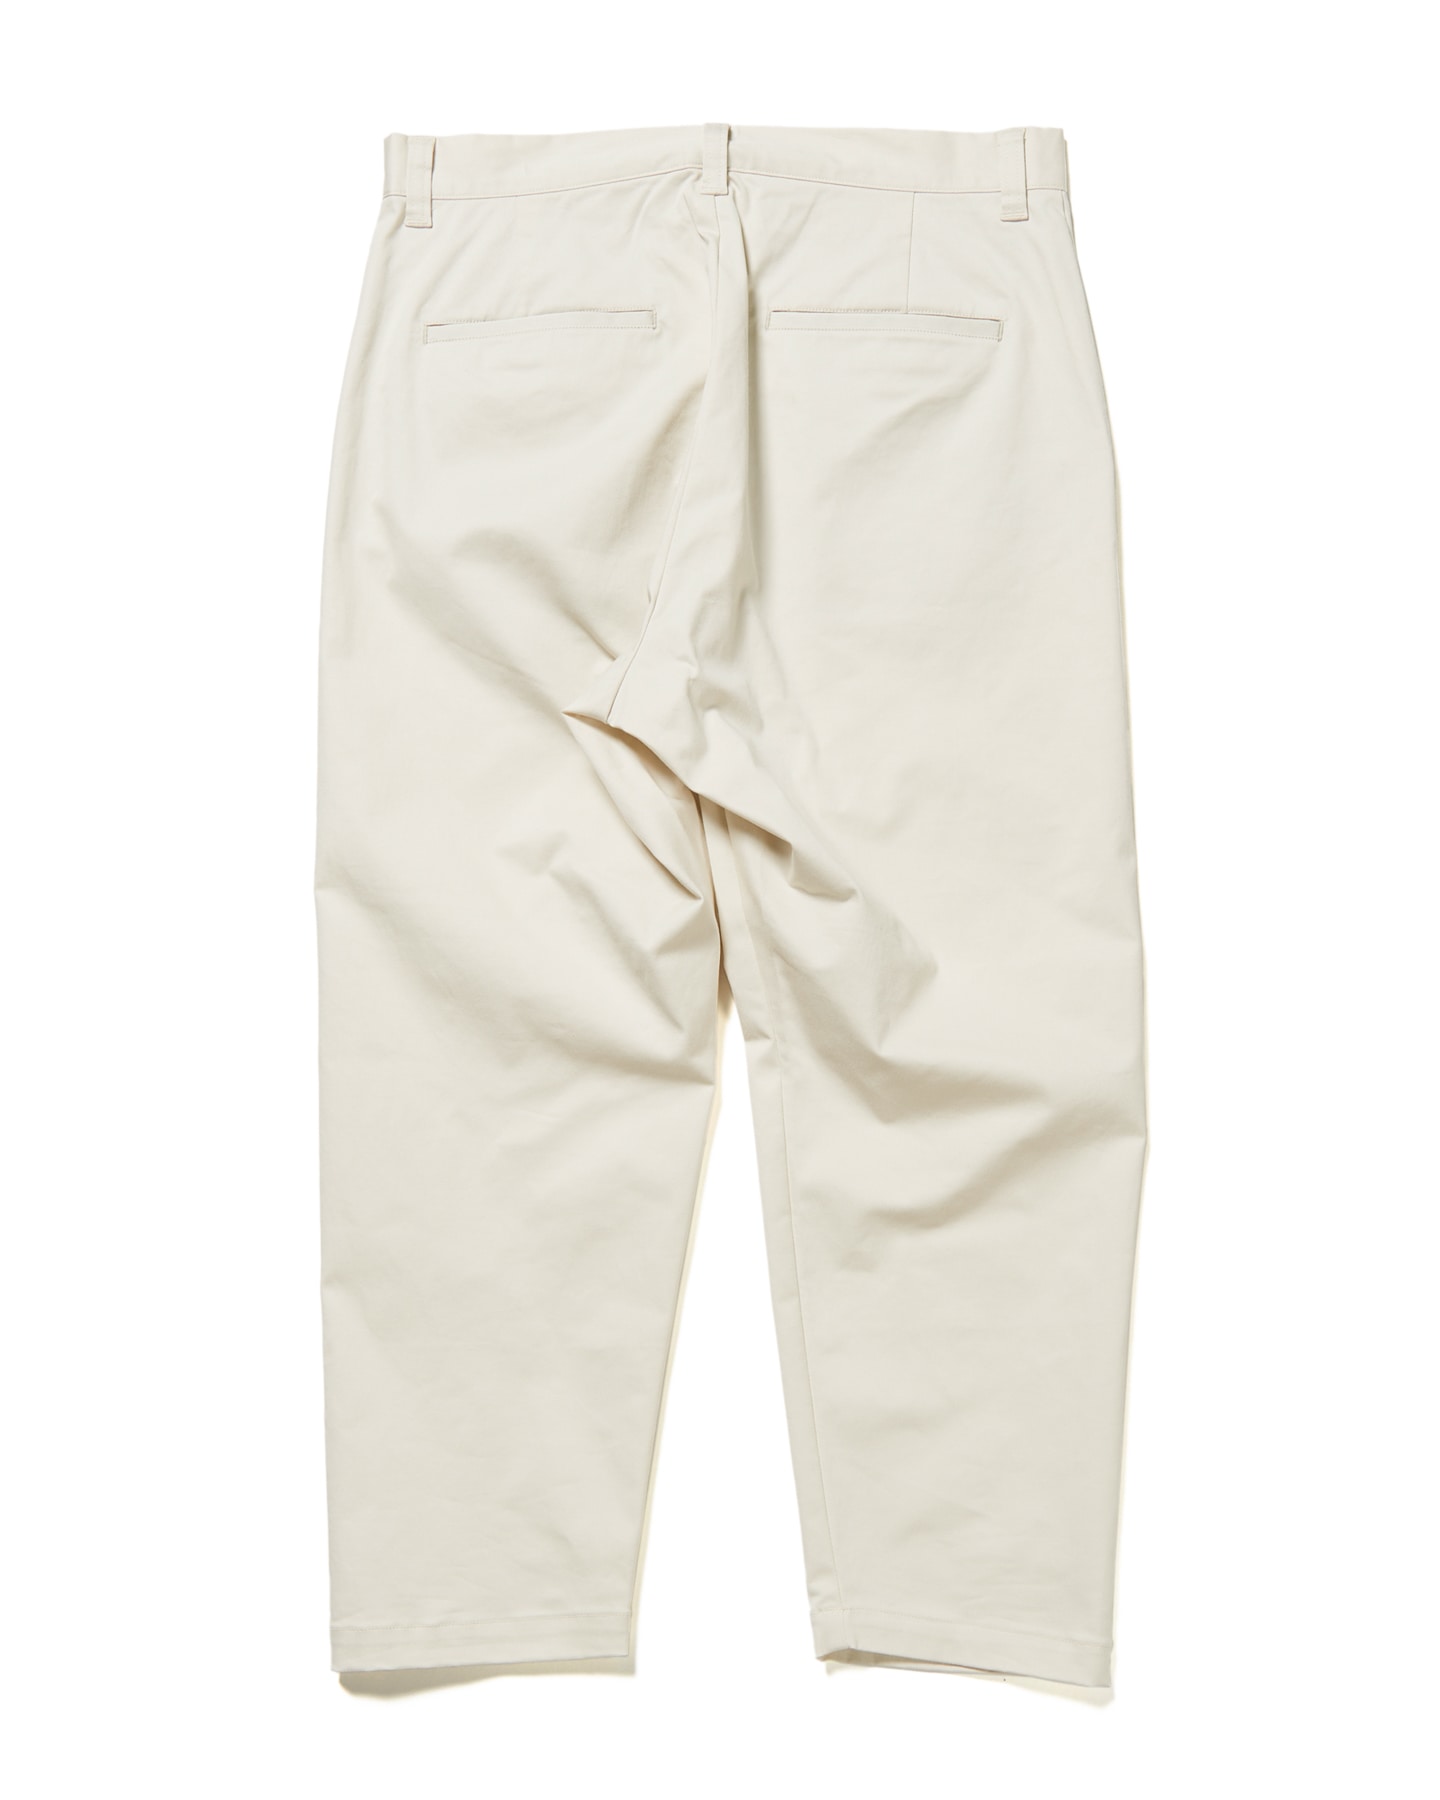 SOPH. | WIDE CROPPED PANTS(S OFF WHITE):